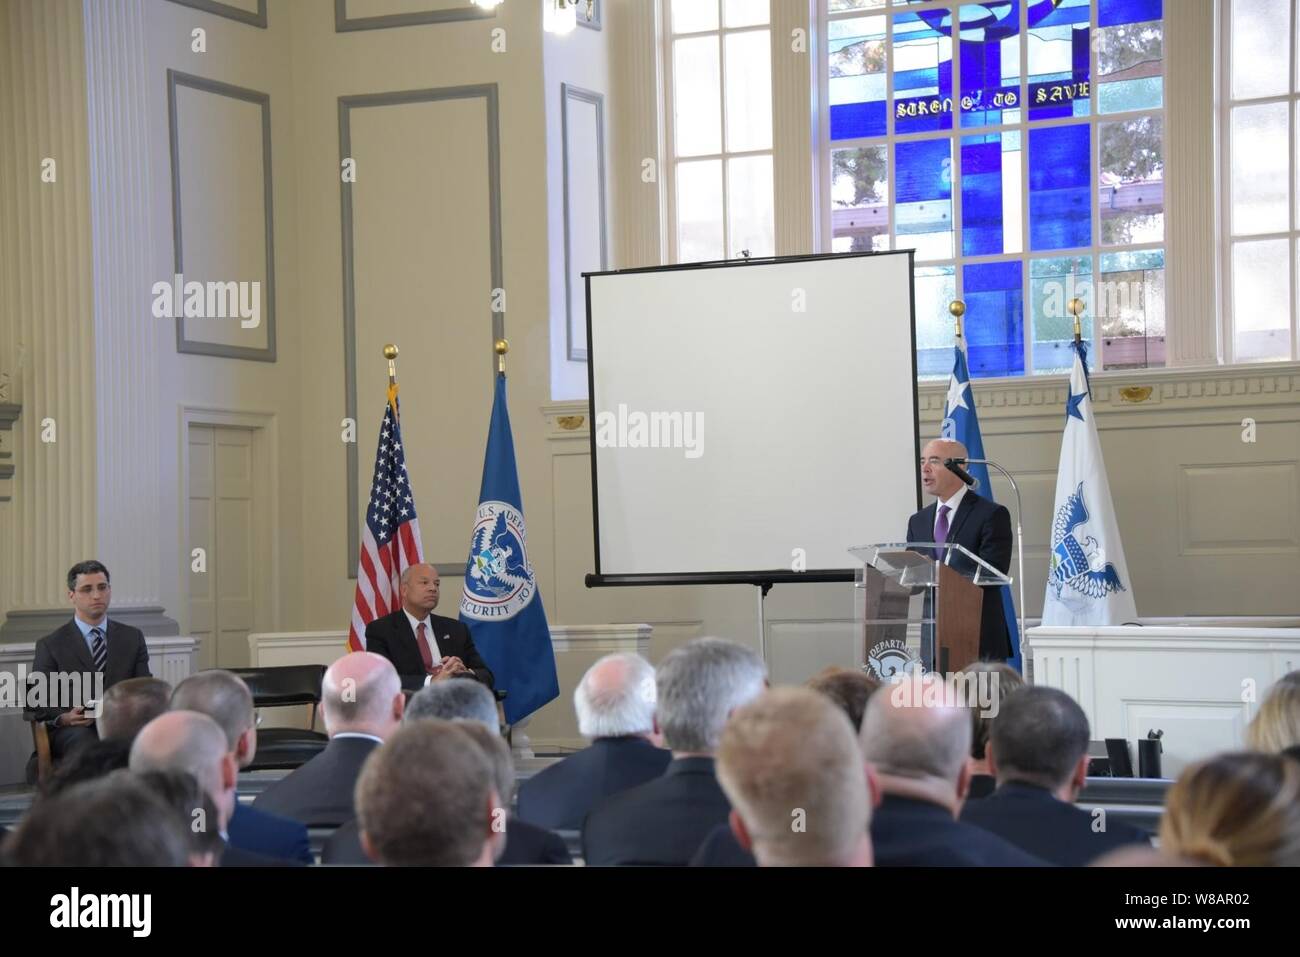 WASHINGTON - A farewell ceremony was held for Deputy Secretary of Homeland Security Alejandro Mayorkas, which included remarks delivered by several members of President Obama’s Administration and DHS Component leaders, Oct. 24, 2016. Deputy Secretary Mayorkas was sworn in as Deputy Secretary of DHS on Dec. 23, 2013, and prior to becoming the Deputy Secretary of DHS, Mayorkas served as the Director of the Department’s U.S. Citizenship and Immigration Services. Stock Photo